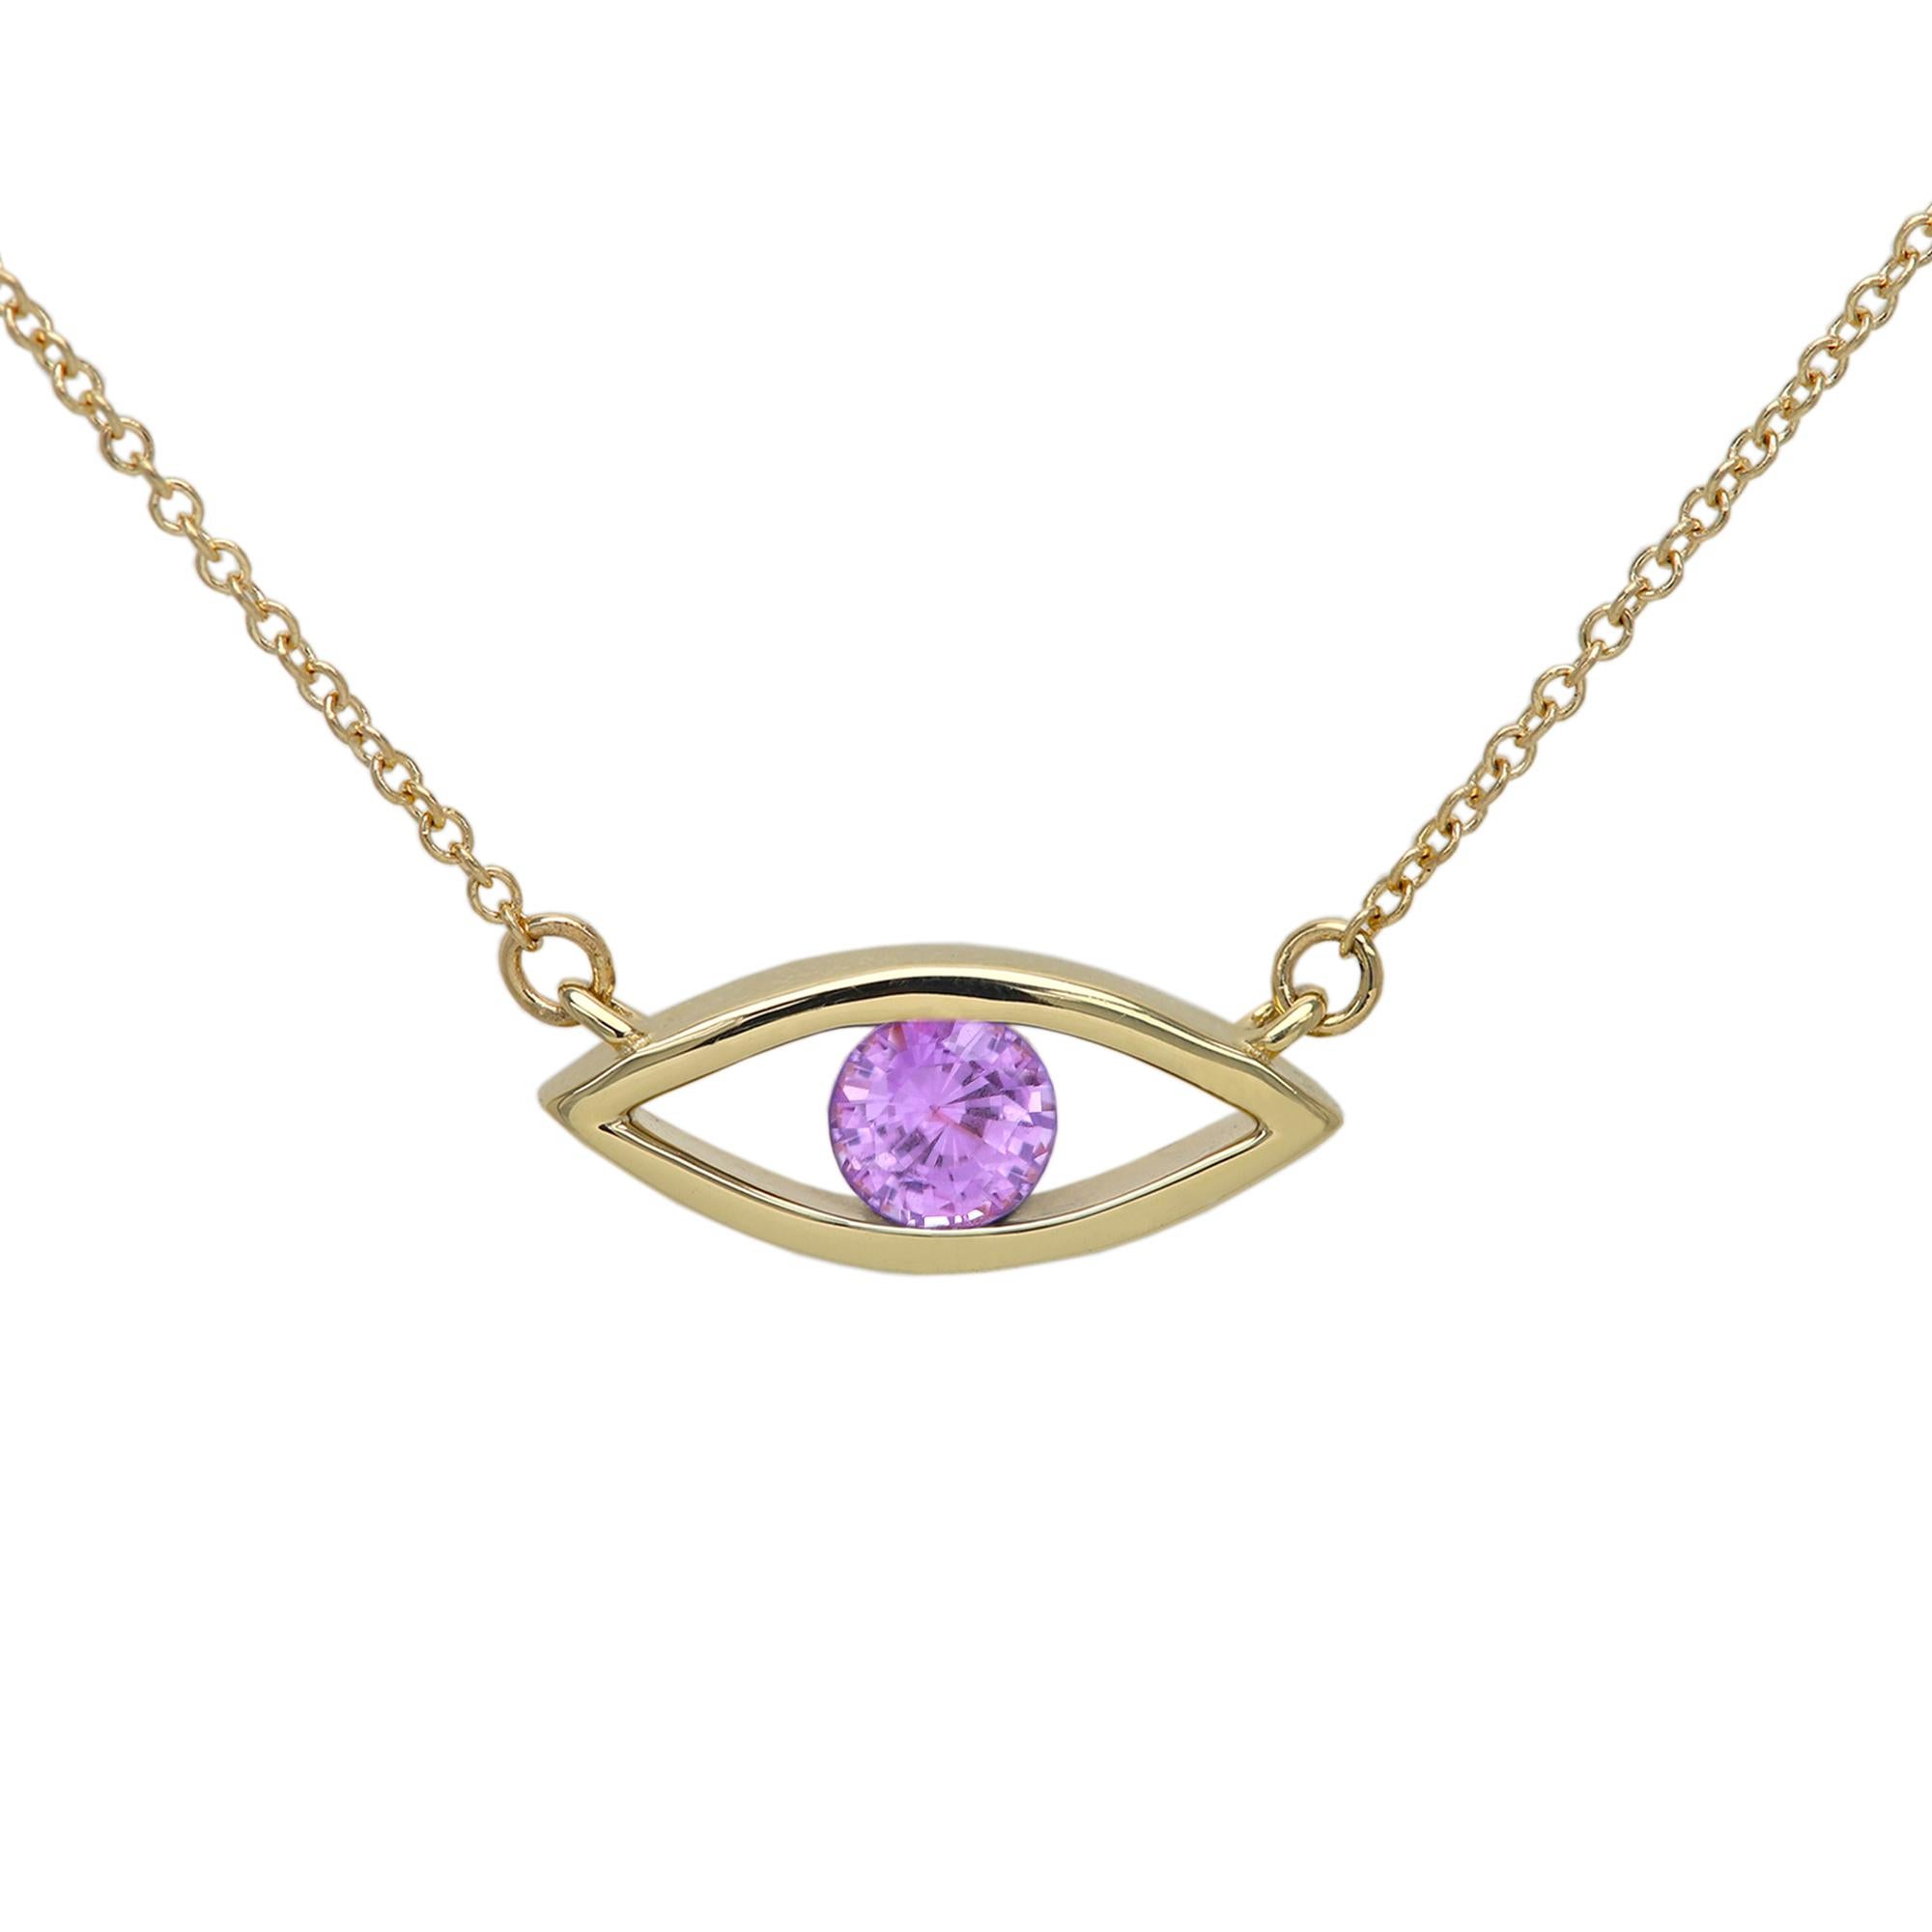 New, Very Elegant & Lovely Evil Eye Birthstone Necklace Solid 14k Yellow Gold with Natural Pink Sapphire gemstone 
Set in Yellow Gold Evil Eye - Good Luck & protection Necklace
Classic Cable Chain and Lobster Lock - all 14k, 
Chain Length - as your